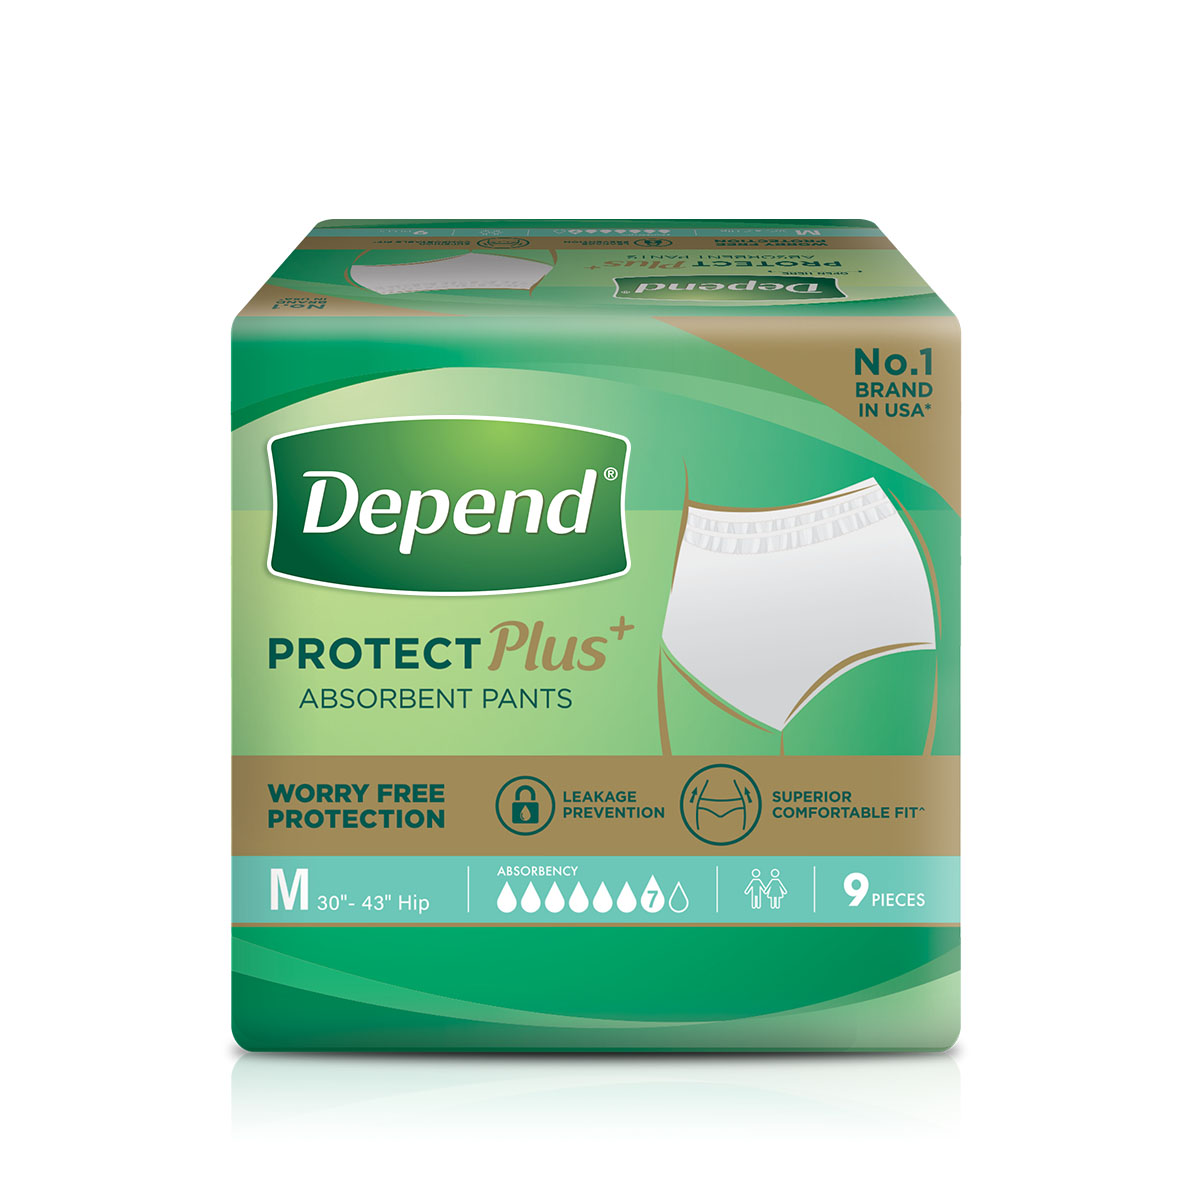 Depend Protect Plus Absorbent Pants Adult Diapers M - 9pcs x 1